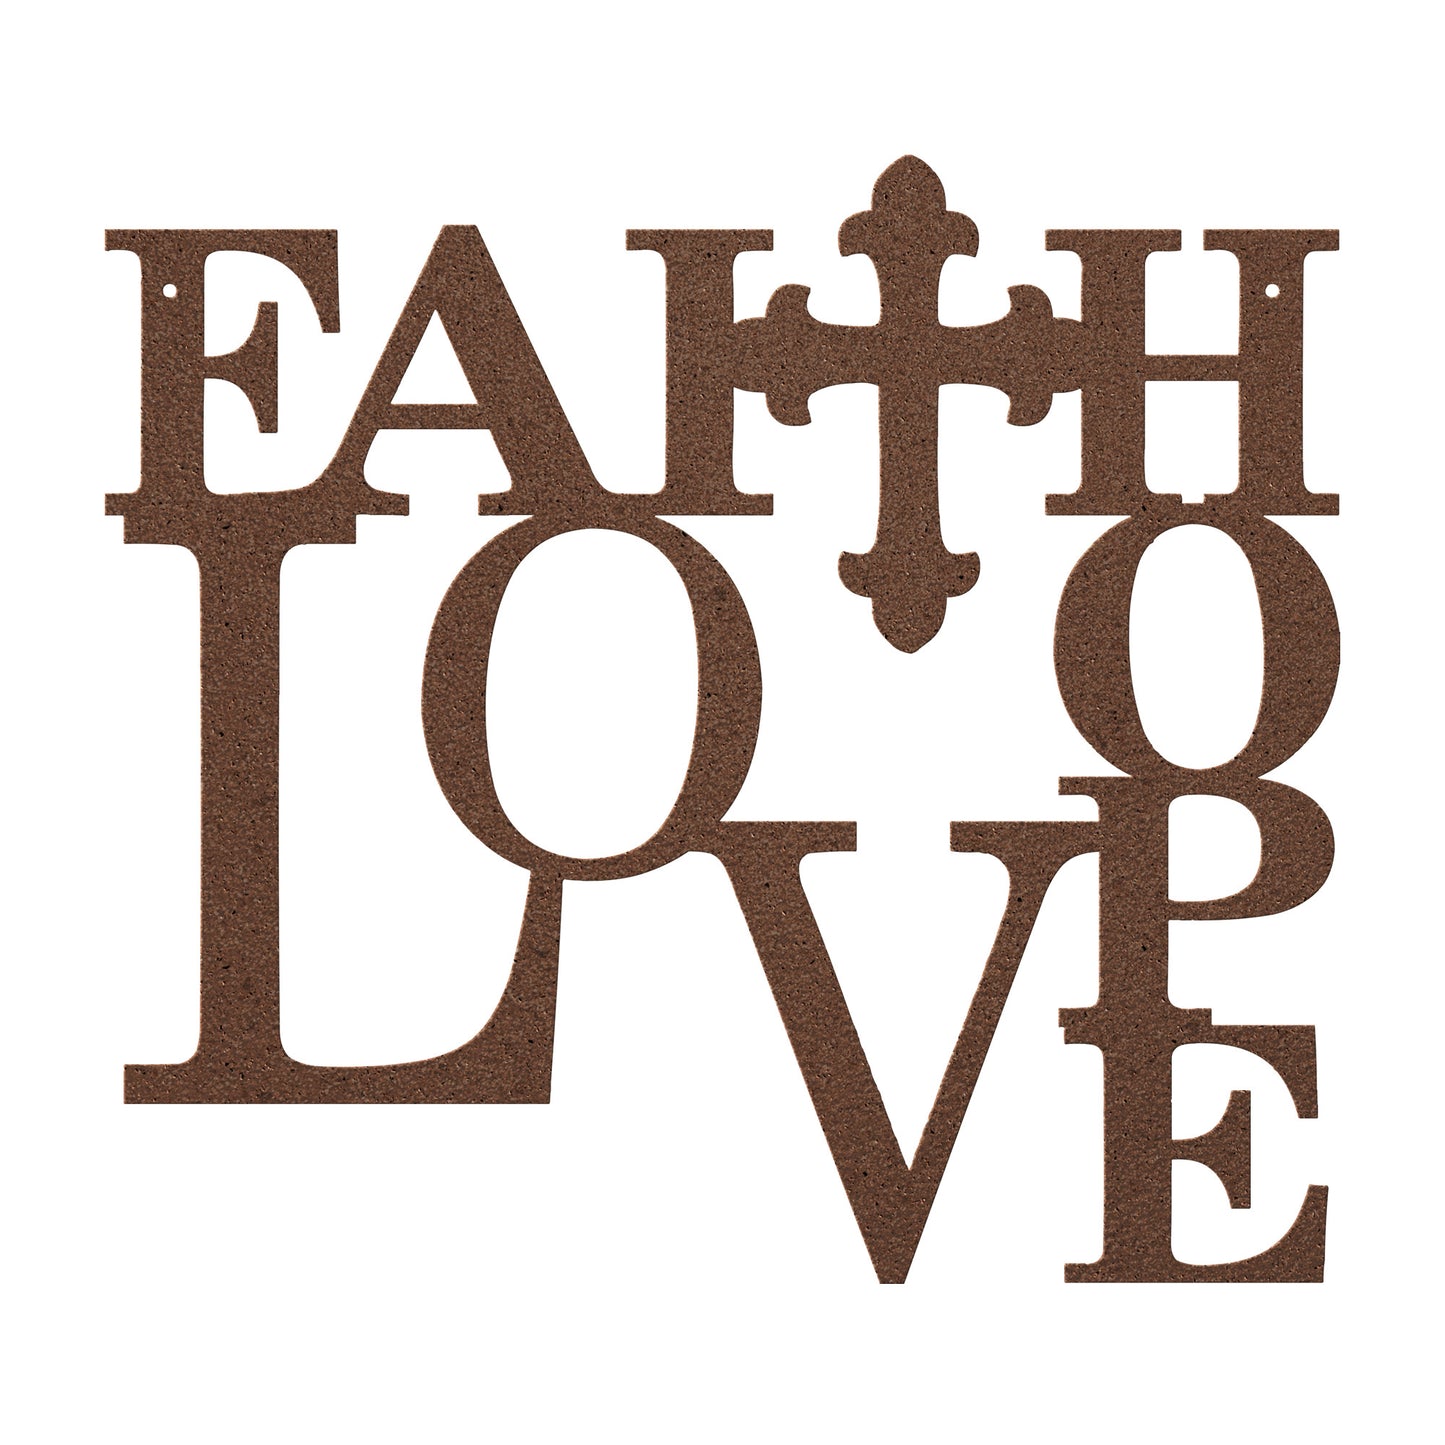 Faith, Hope, and Love Metal Wall Art for a Charming and Rustic Look - Metal Art - USA